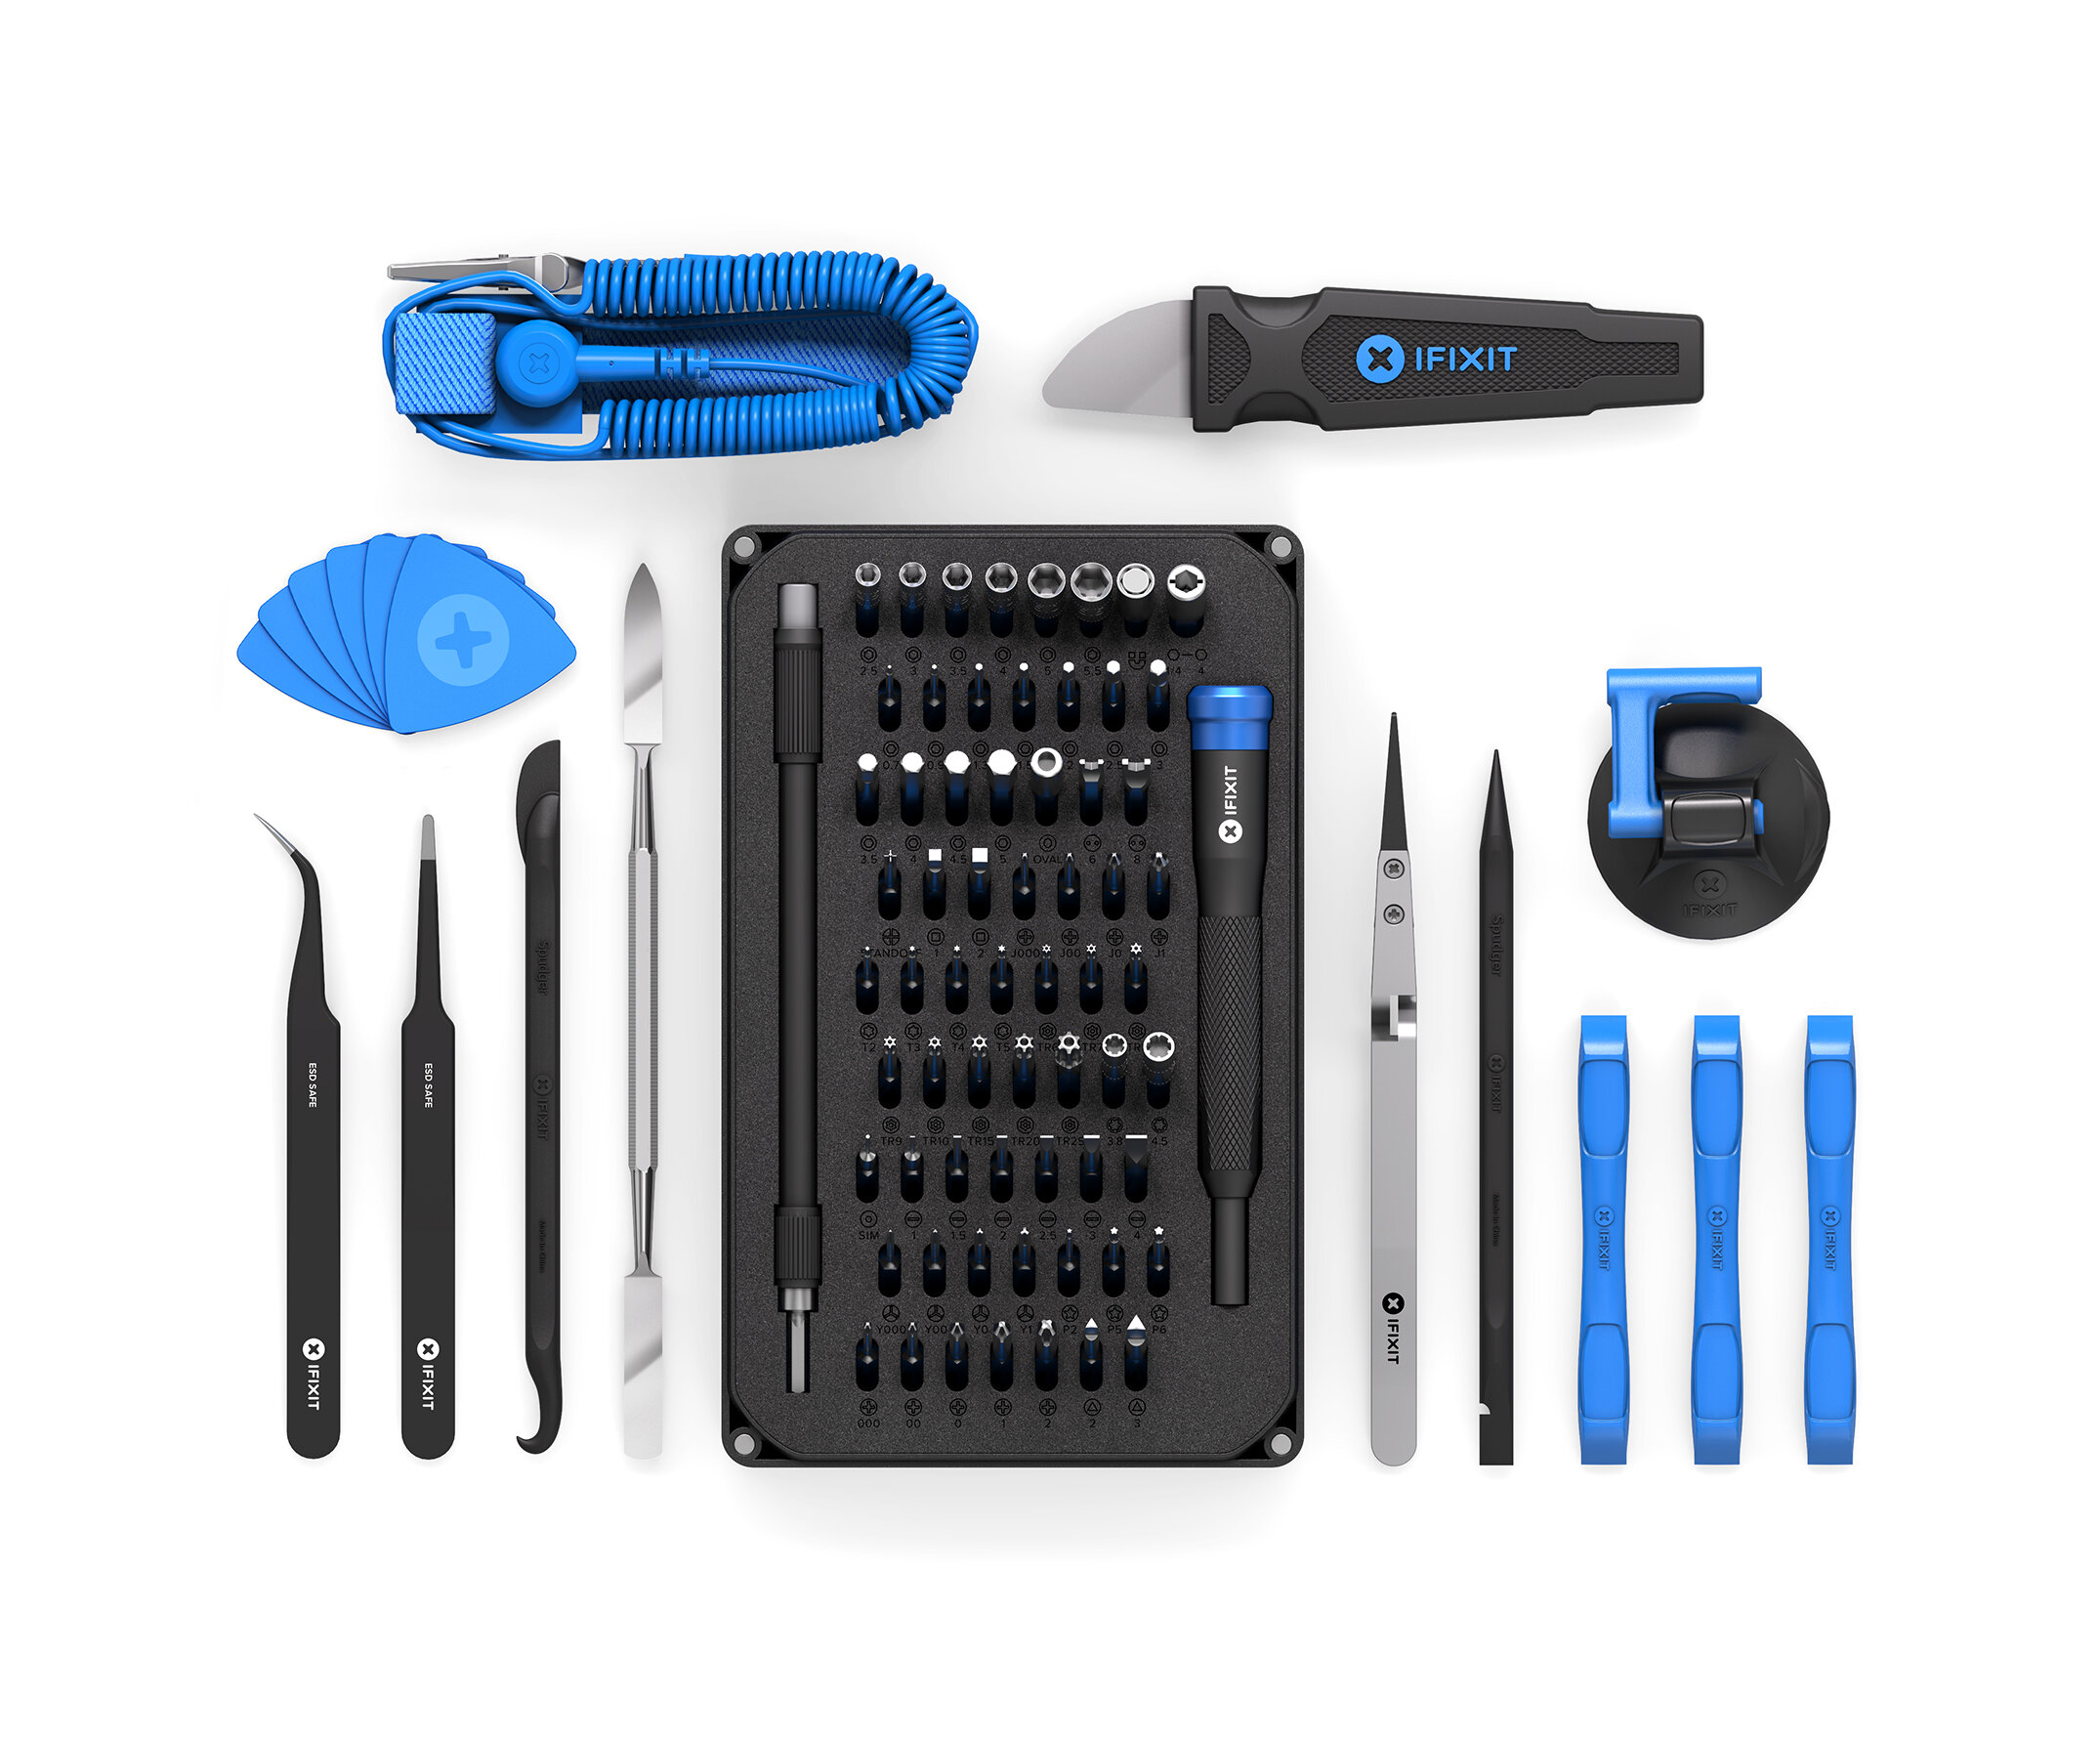 hand tools vertically aligned, mostly black and blue screwdrivers and tools to fix electronics